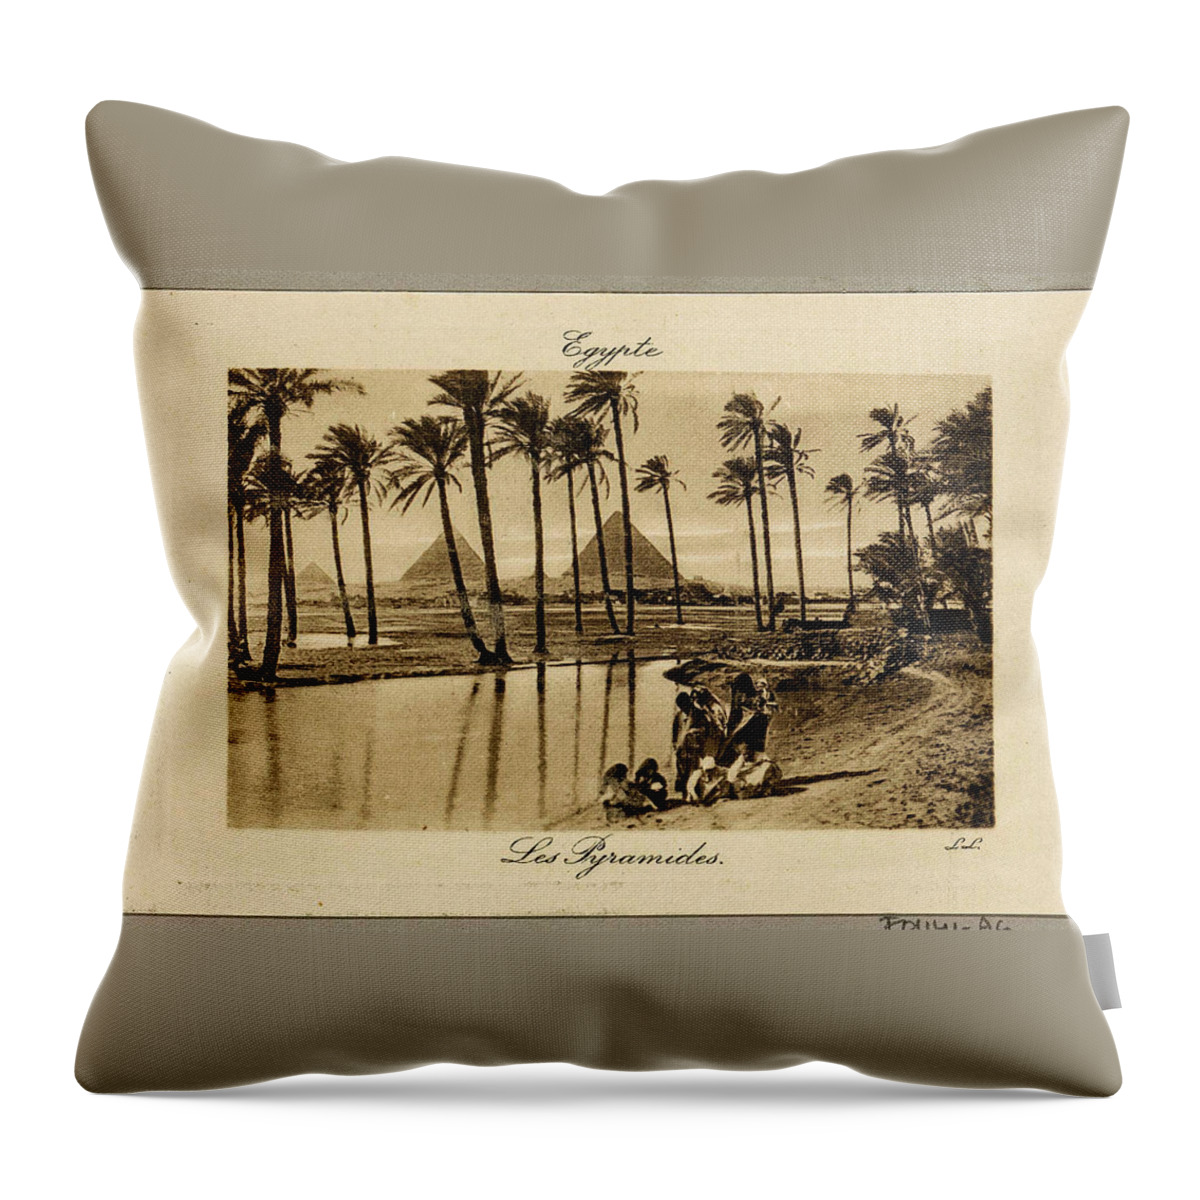 Pyramids In Egypt With An Oasis In The Foreground Throw Pillow featuring the painting Pyramids in Egypt with an oasis in the foreground, LL, c. 1900 - in or before 1910 by Artistic Rifki